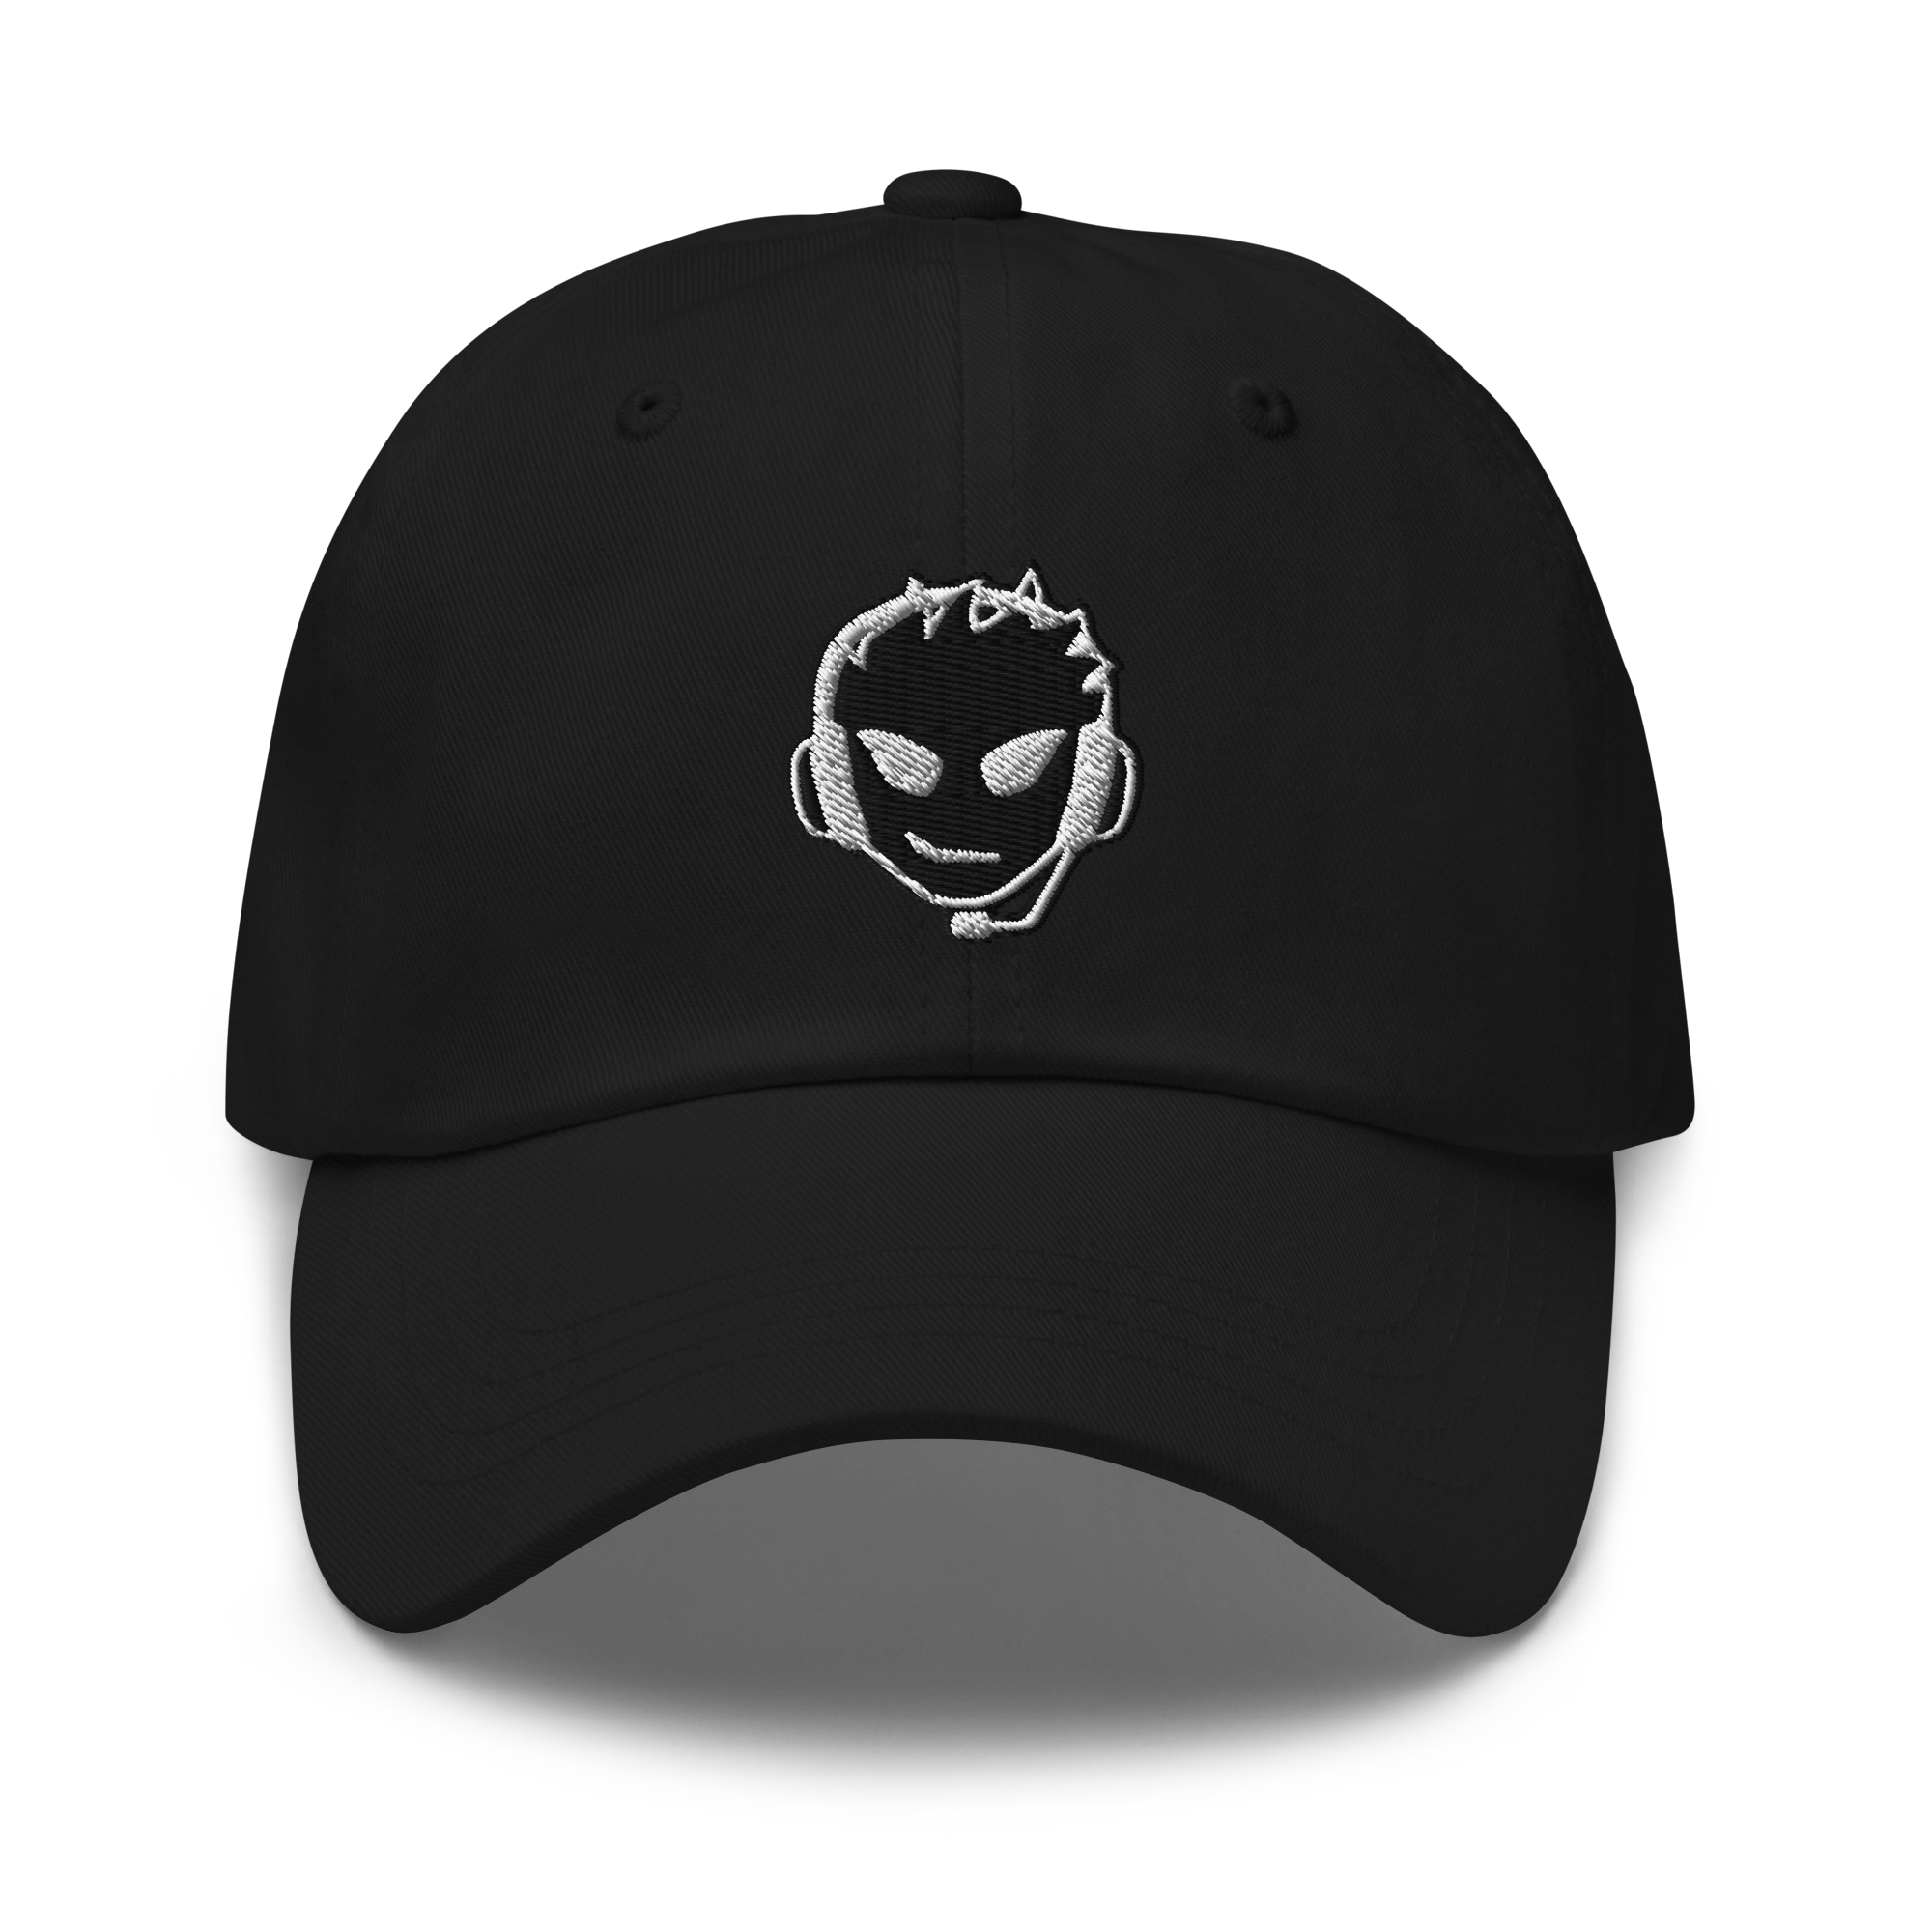 Player One Black Classic Hat